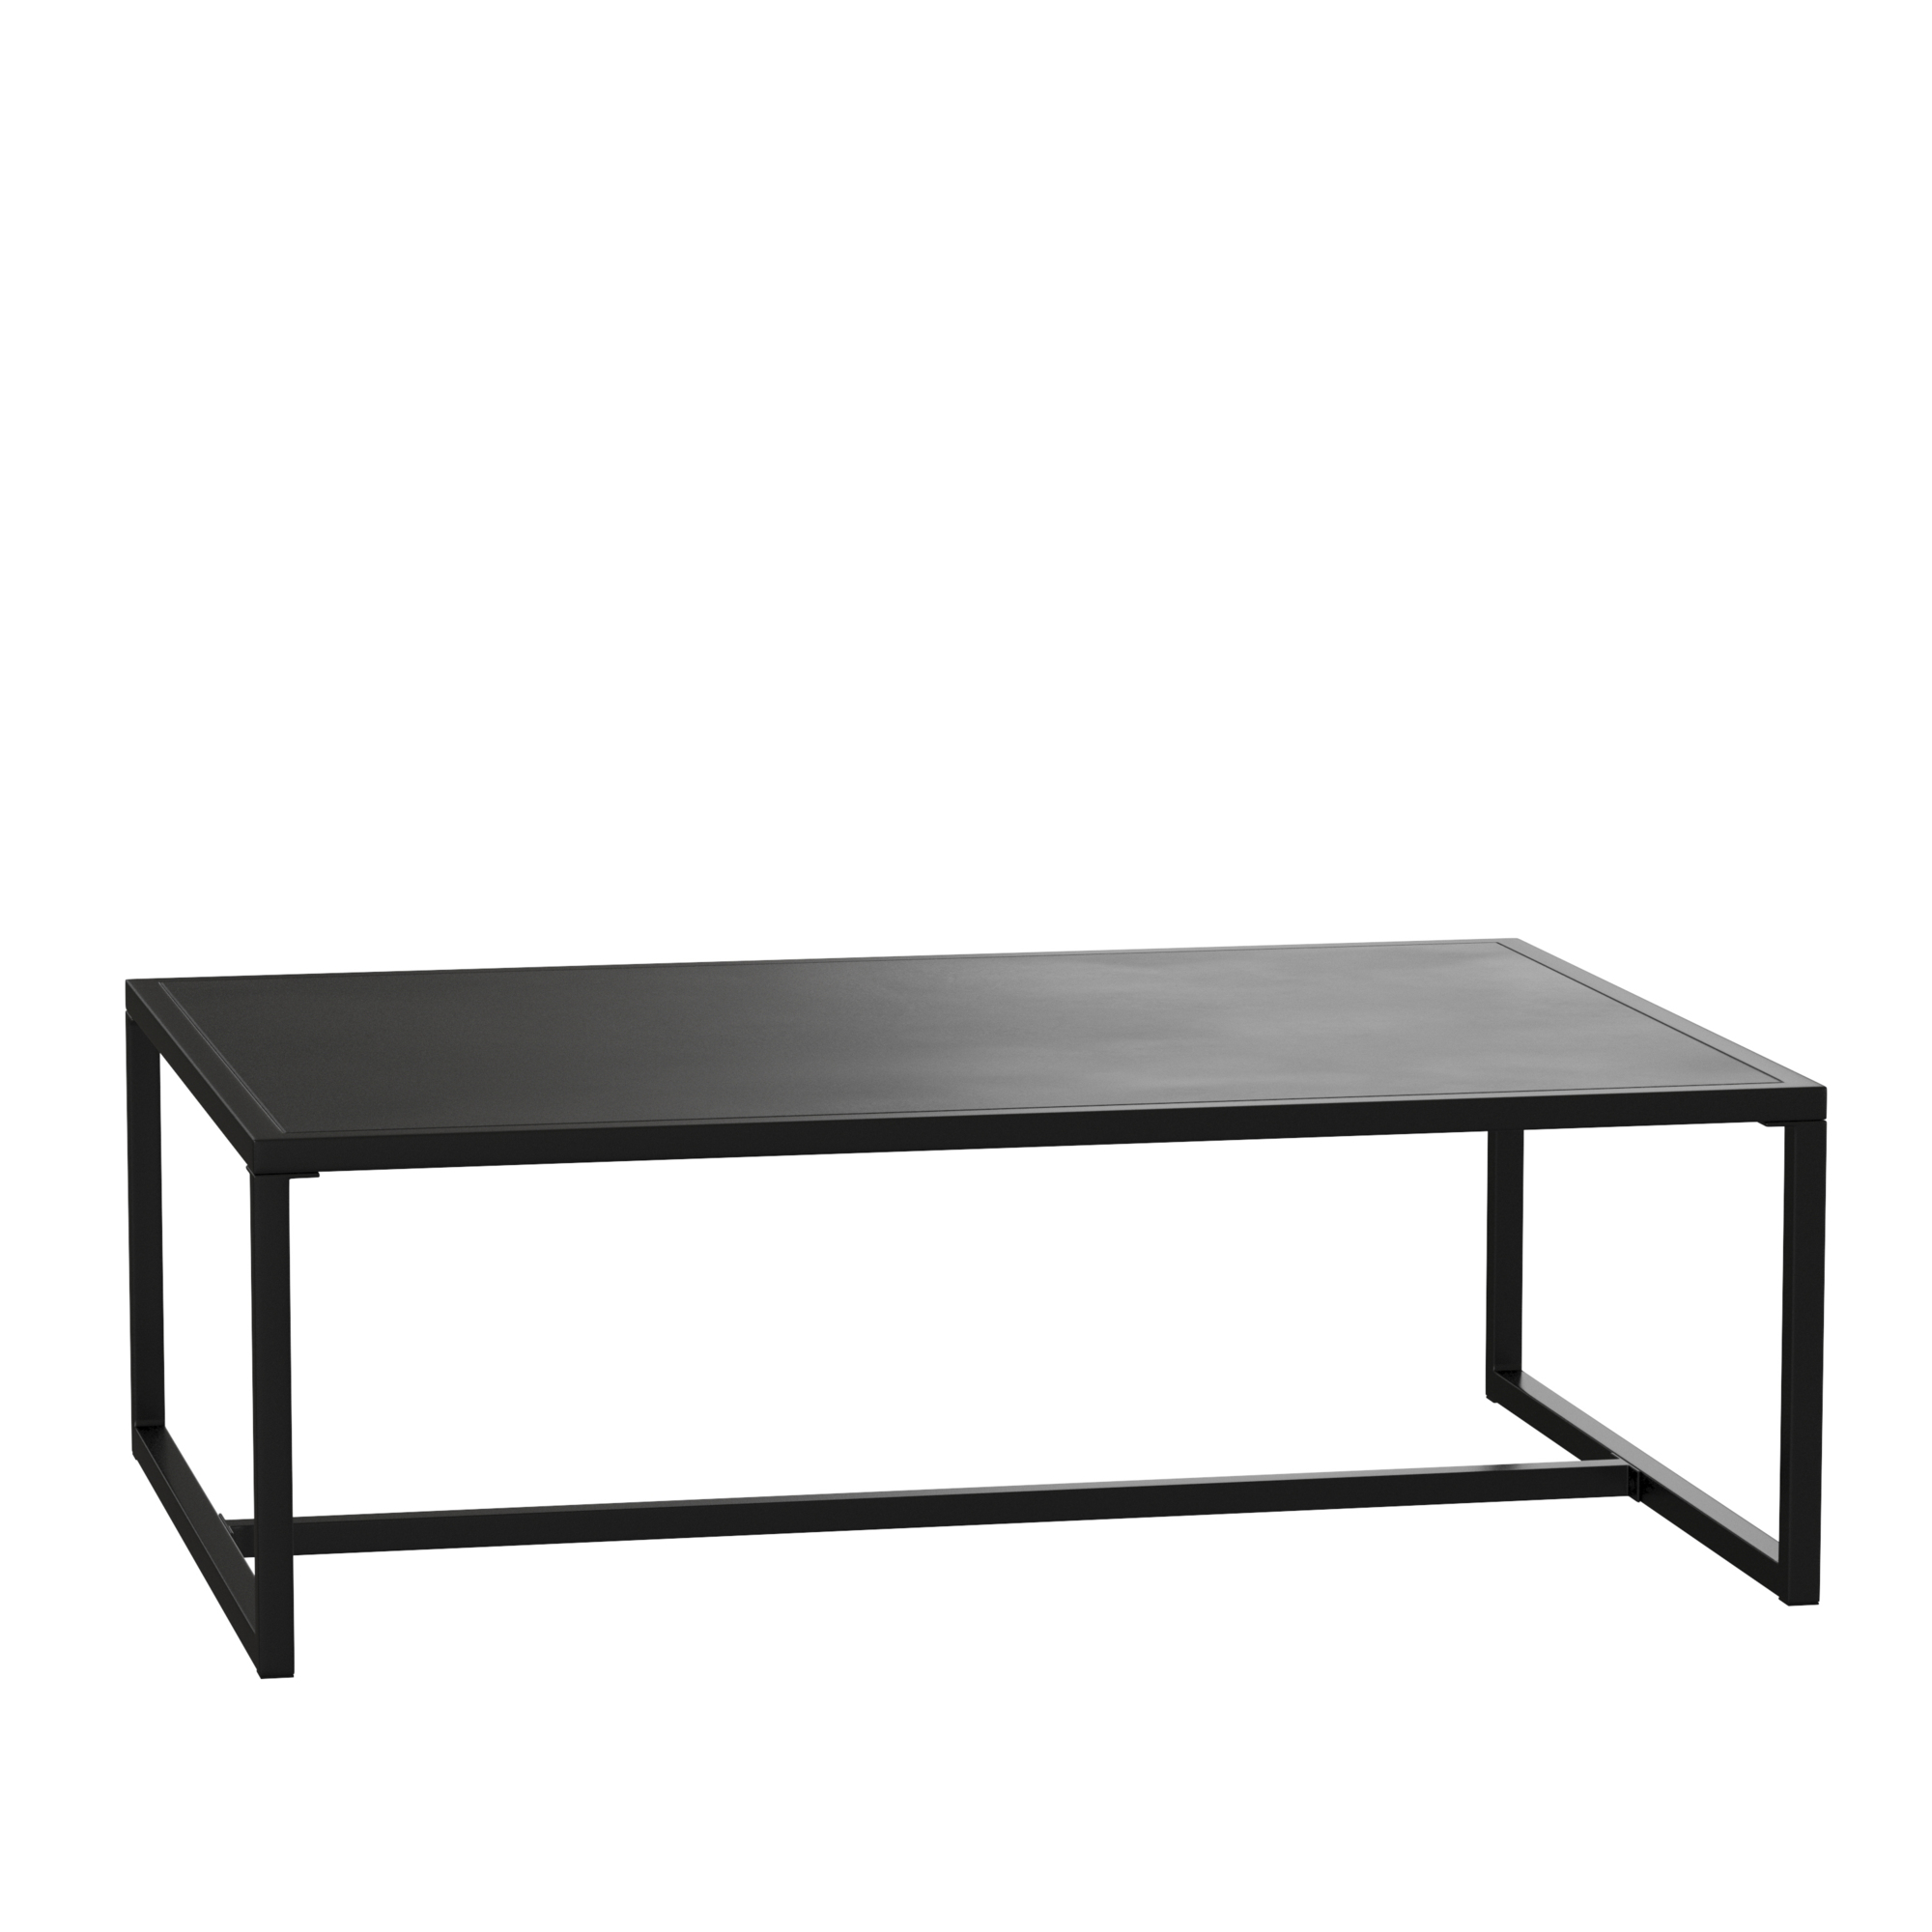 Flash Furniture, Black Steel Coffee Table for Indoor or Outdoor Use, Table Shape Rectangle, Primary Color Black, Height 15 in, Model XUT6R60USO1TBK